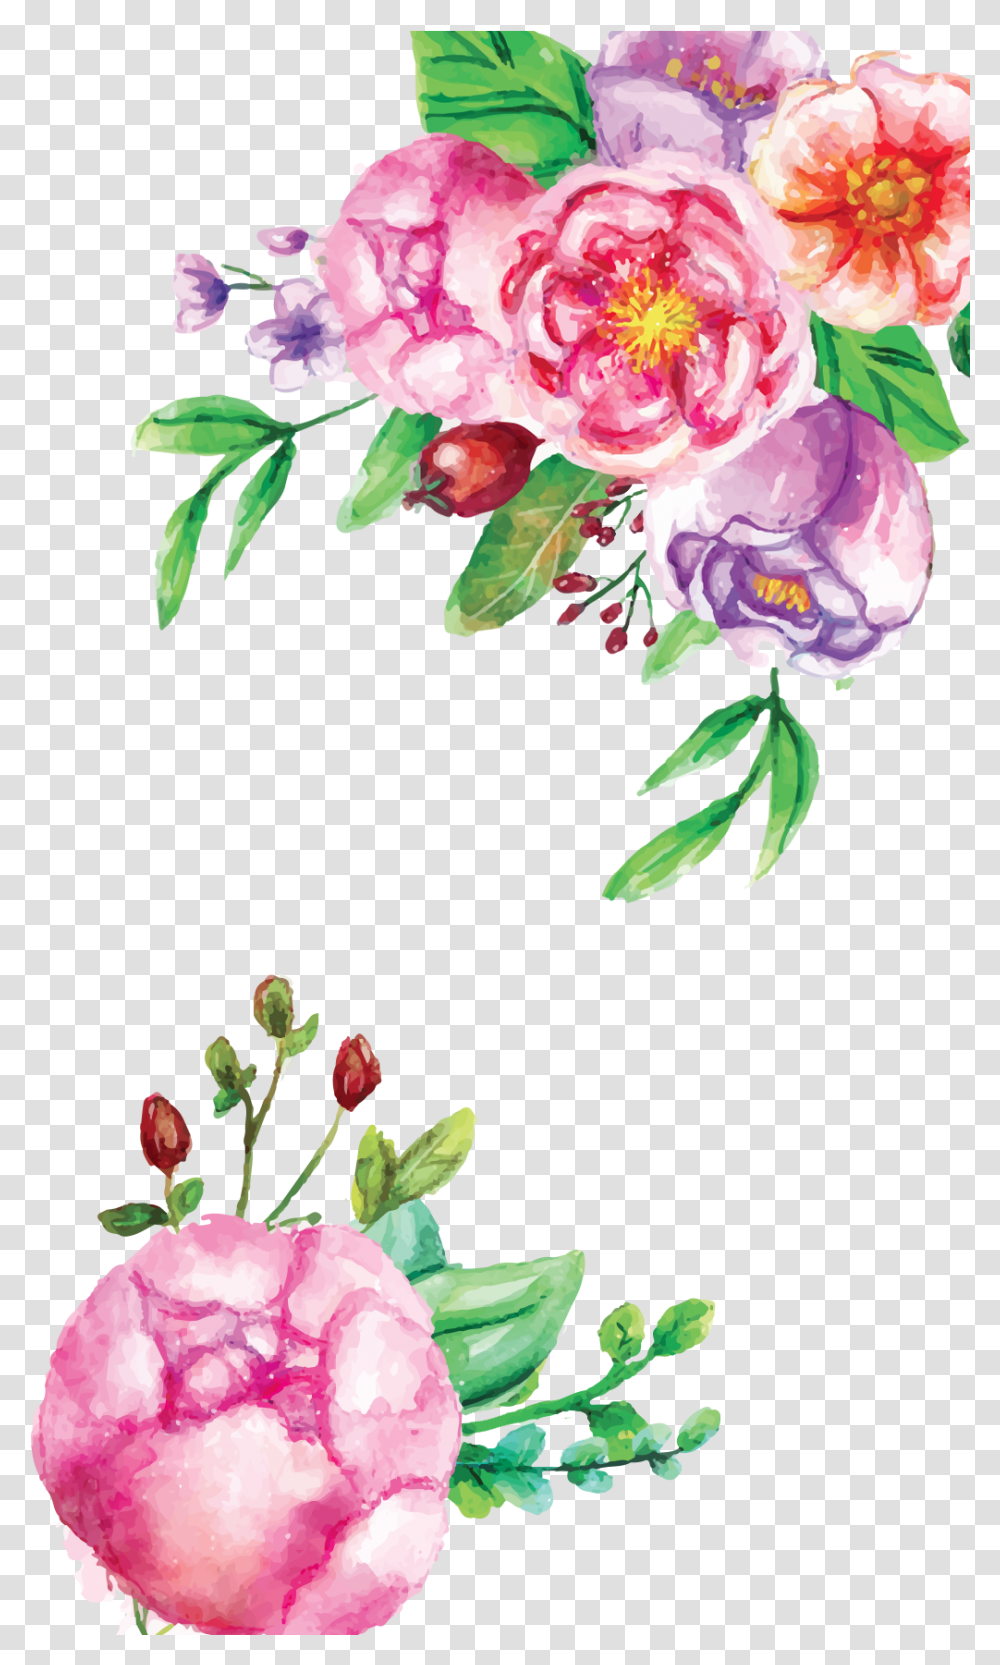 Free Icons Pink Floral Watercolor Pink Floral Watercolor, Plant, Flower, Blossom, Peony Transparent Png